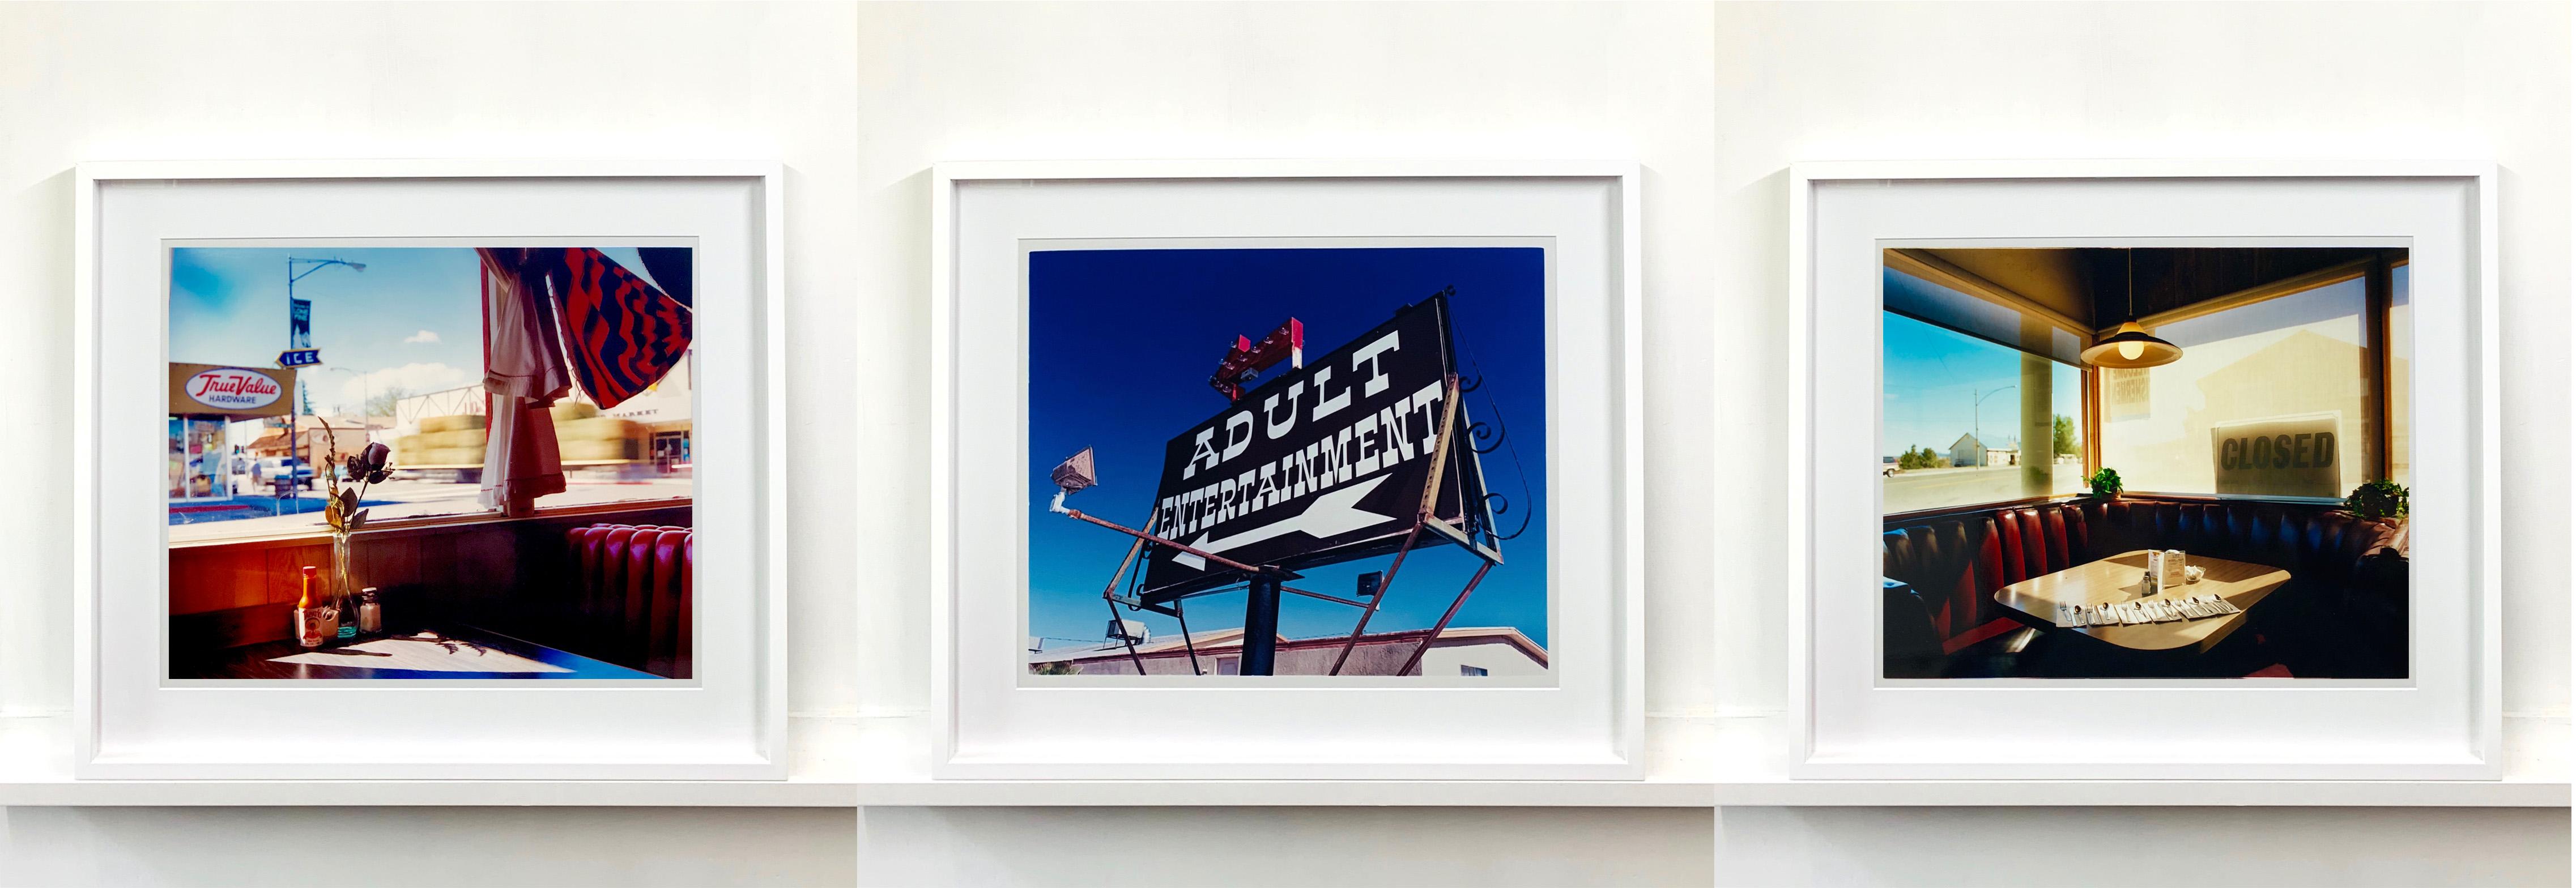 Adult Entertainment, Beatty, Navada - Americana Sign, Color Photography For Sale 4